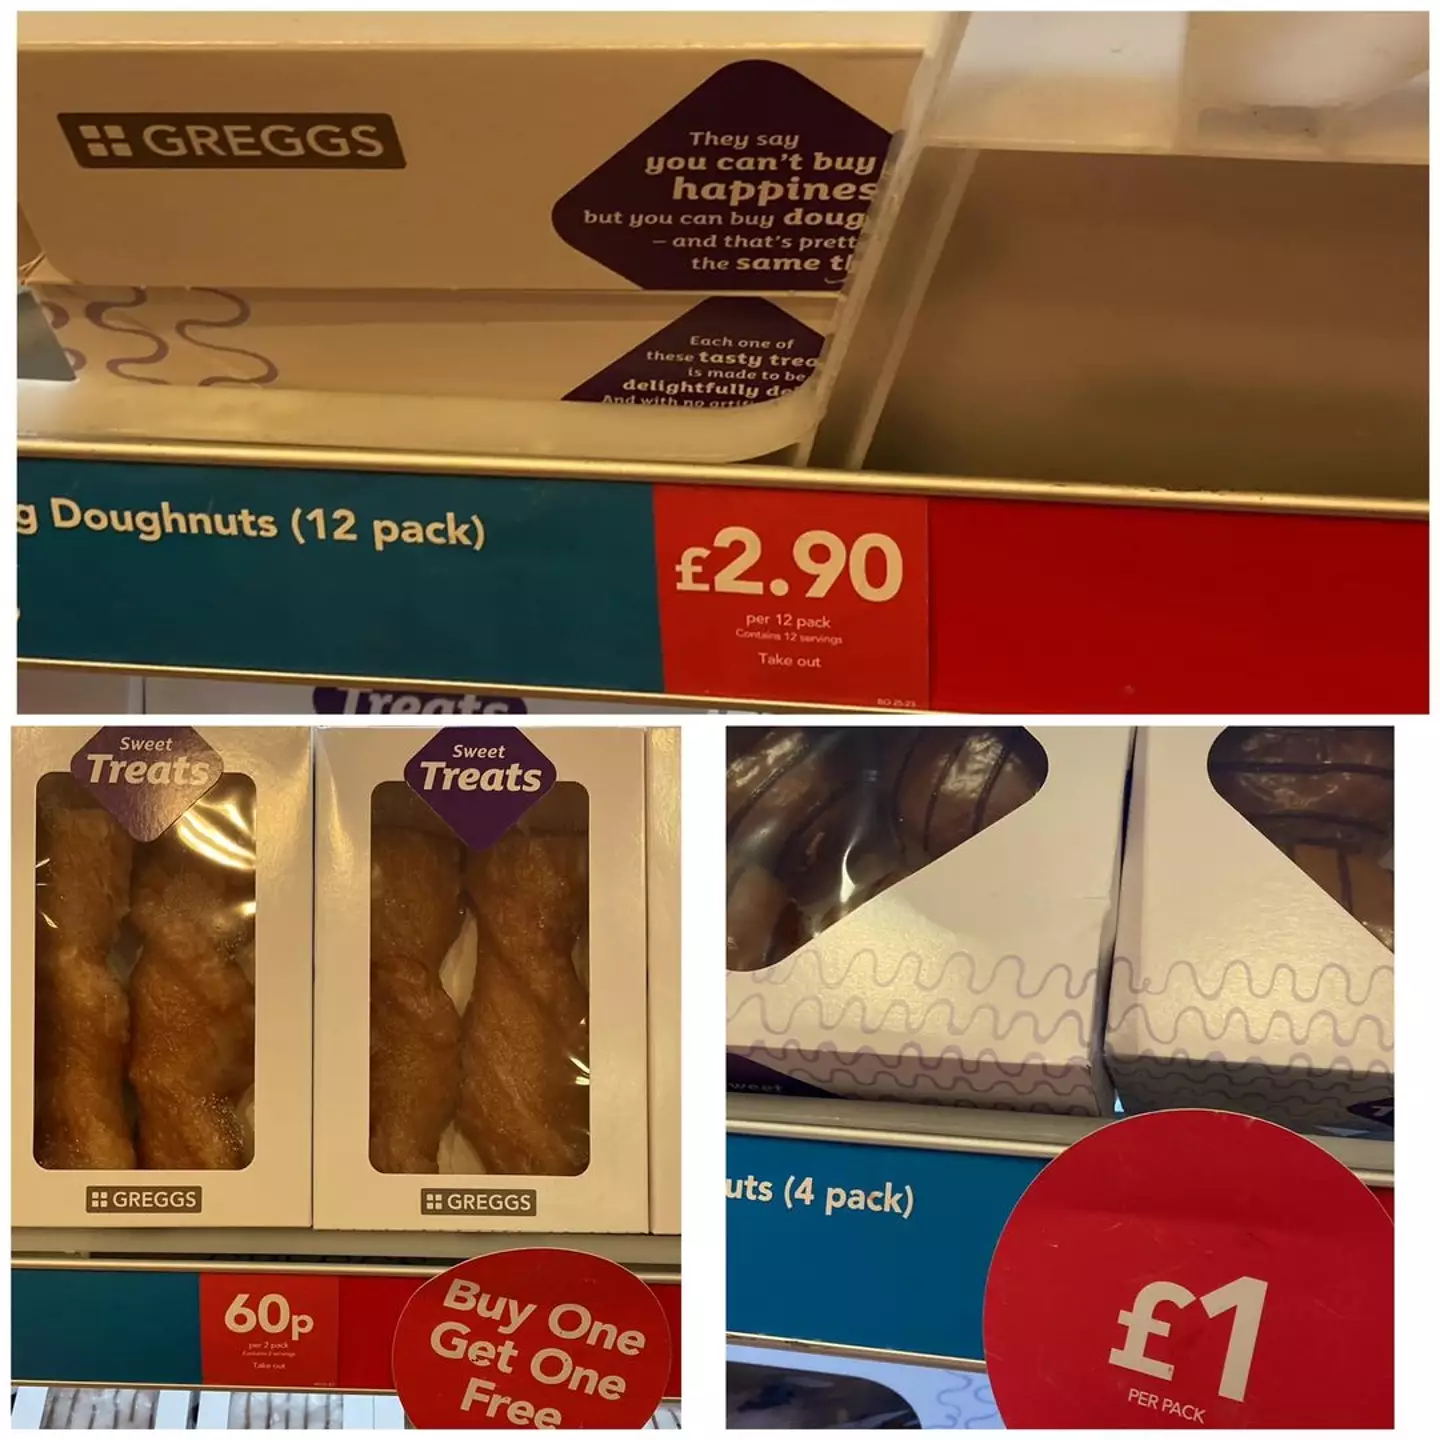 People were buzzing over the Greggs outlet prices.